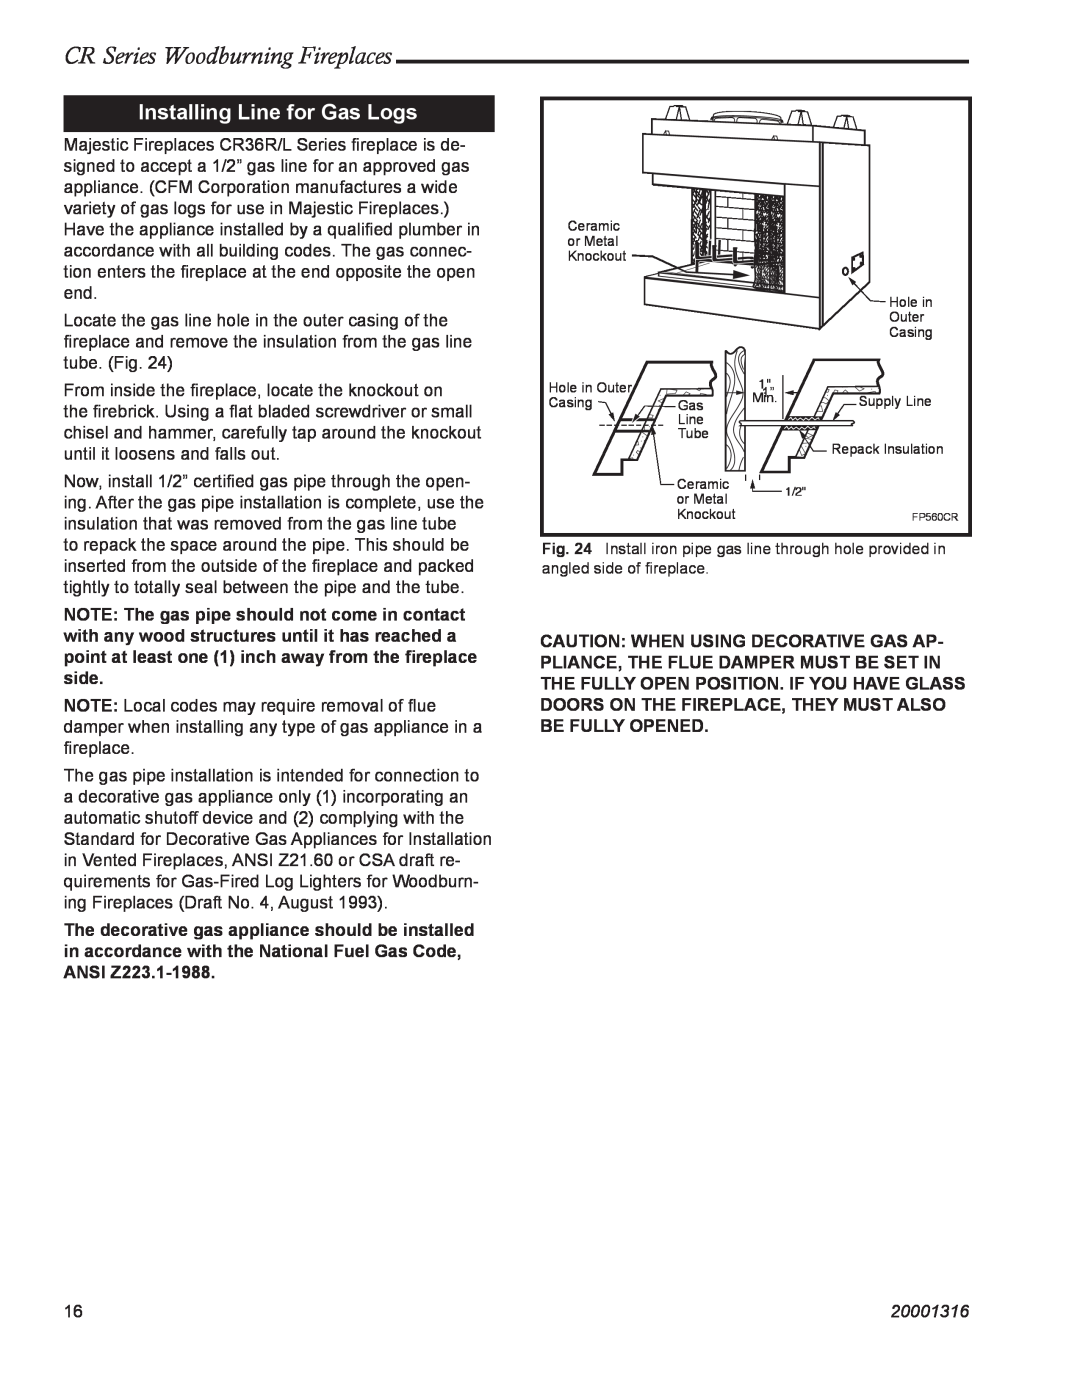 Vermont Casting CR36R, CR36L manual Installing Line for Gas Logs, CR Series Woodburning Fireplaces, 20001316 